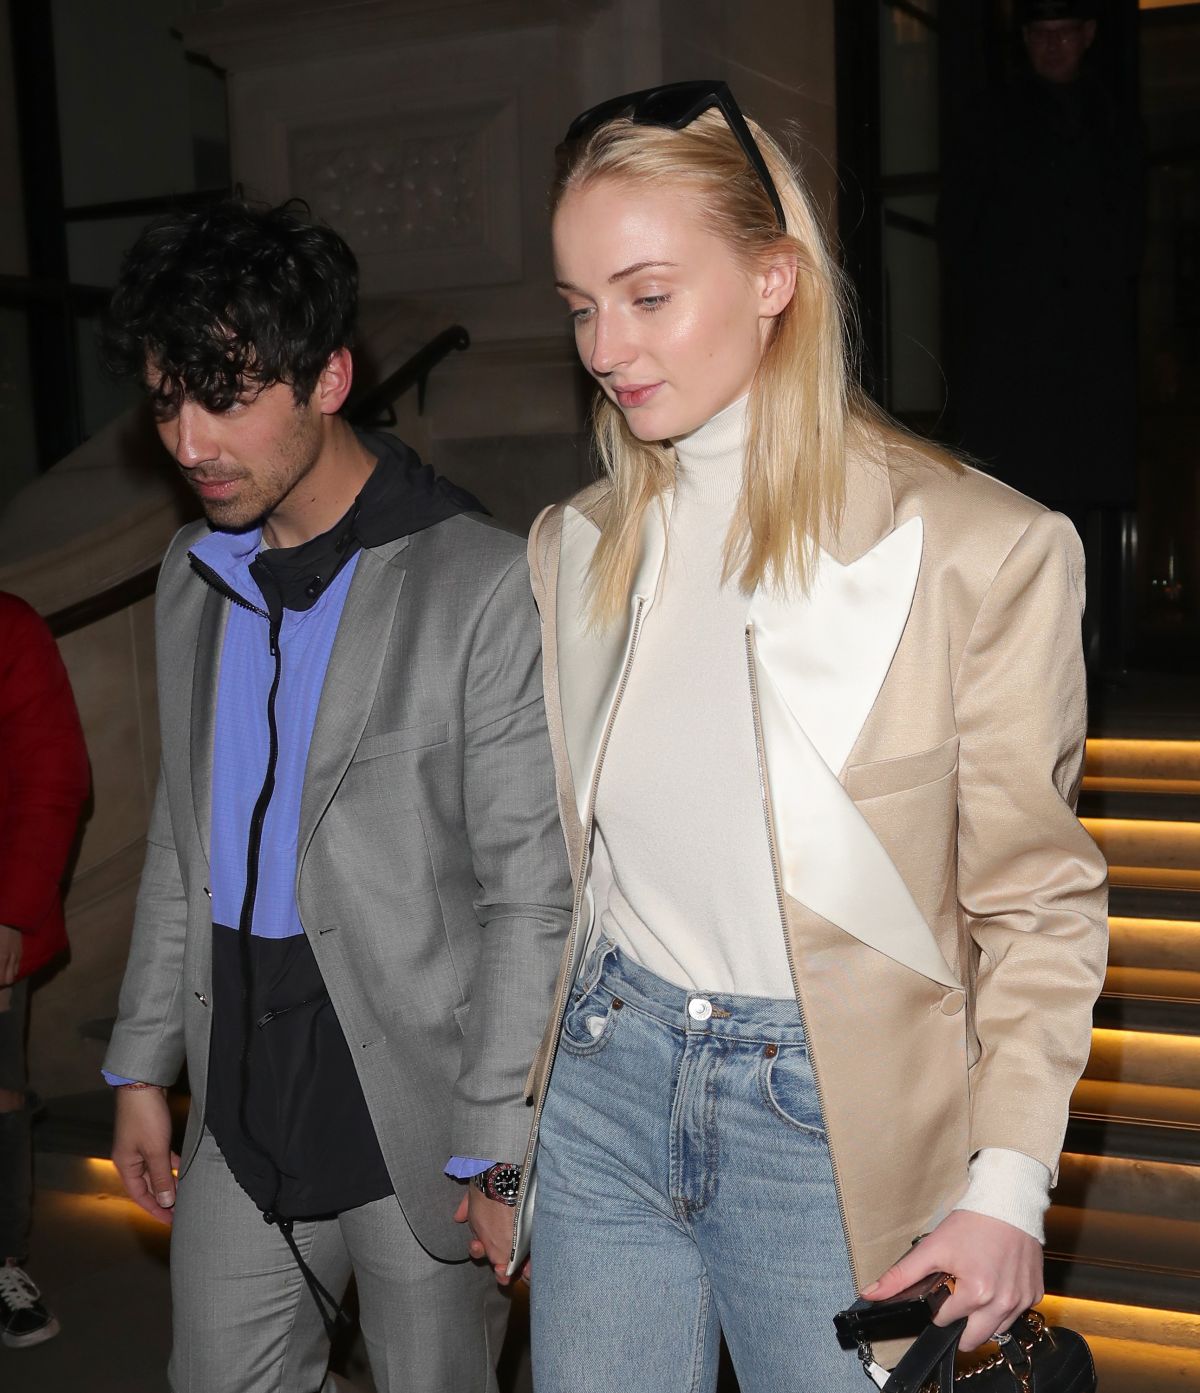 Sophie Turner The Arts Club February 15, 2019 – Star Style